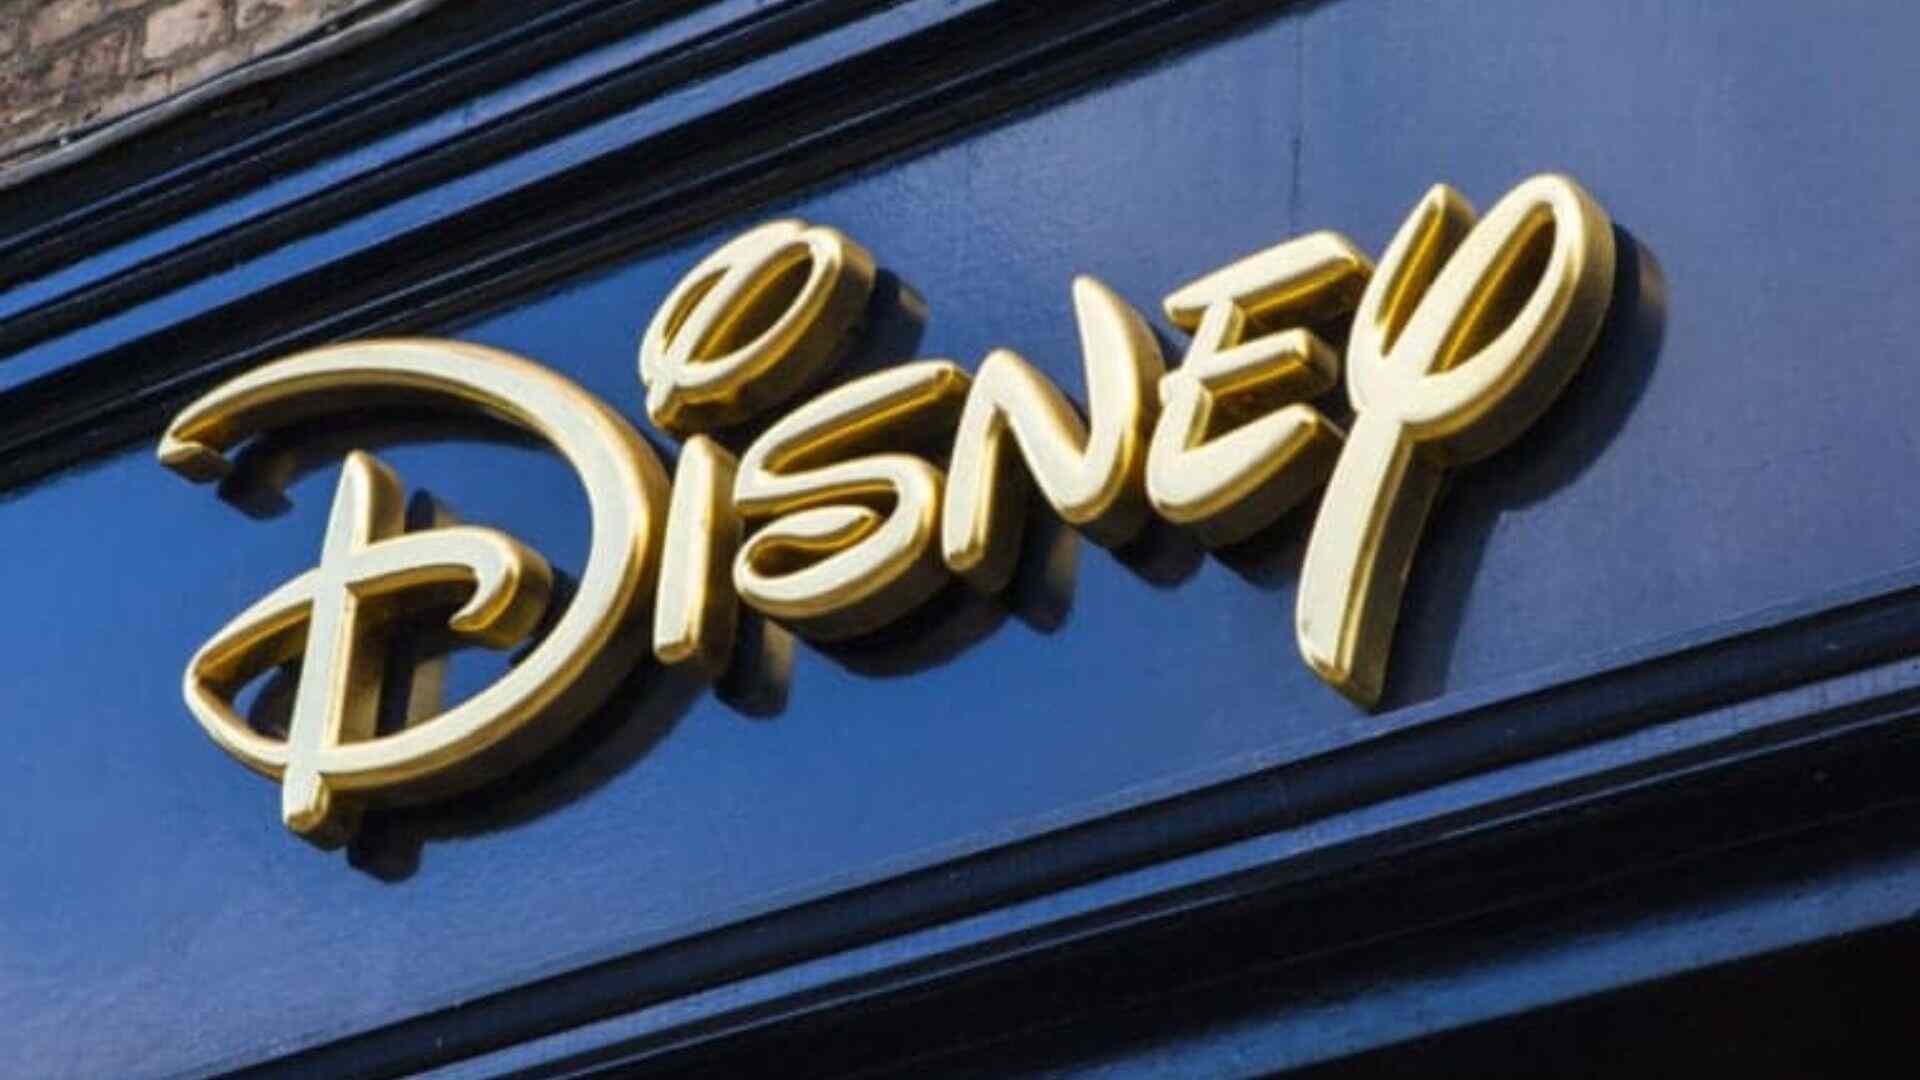 Disney To Sell $1 Billion Stake In Tata Play